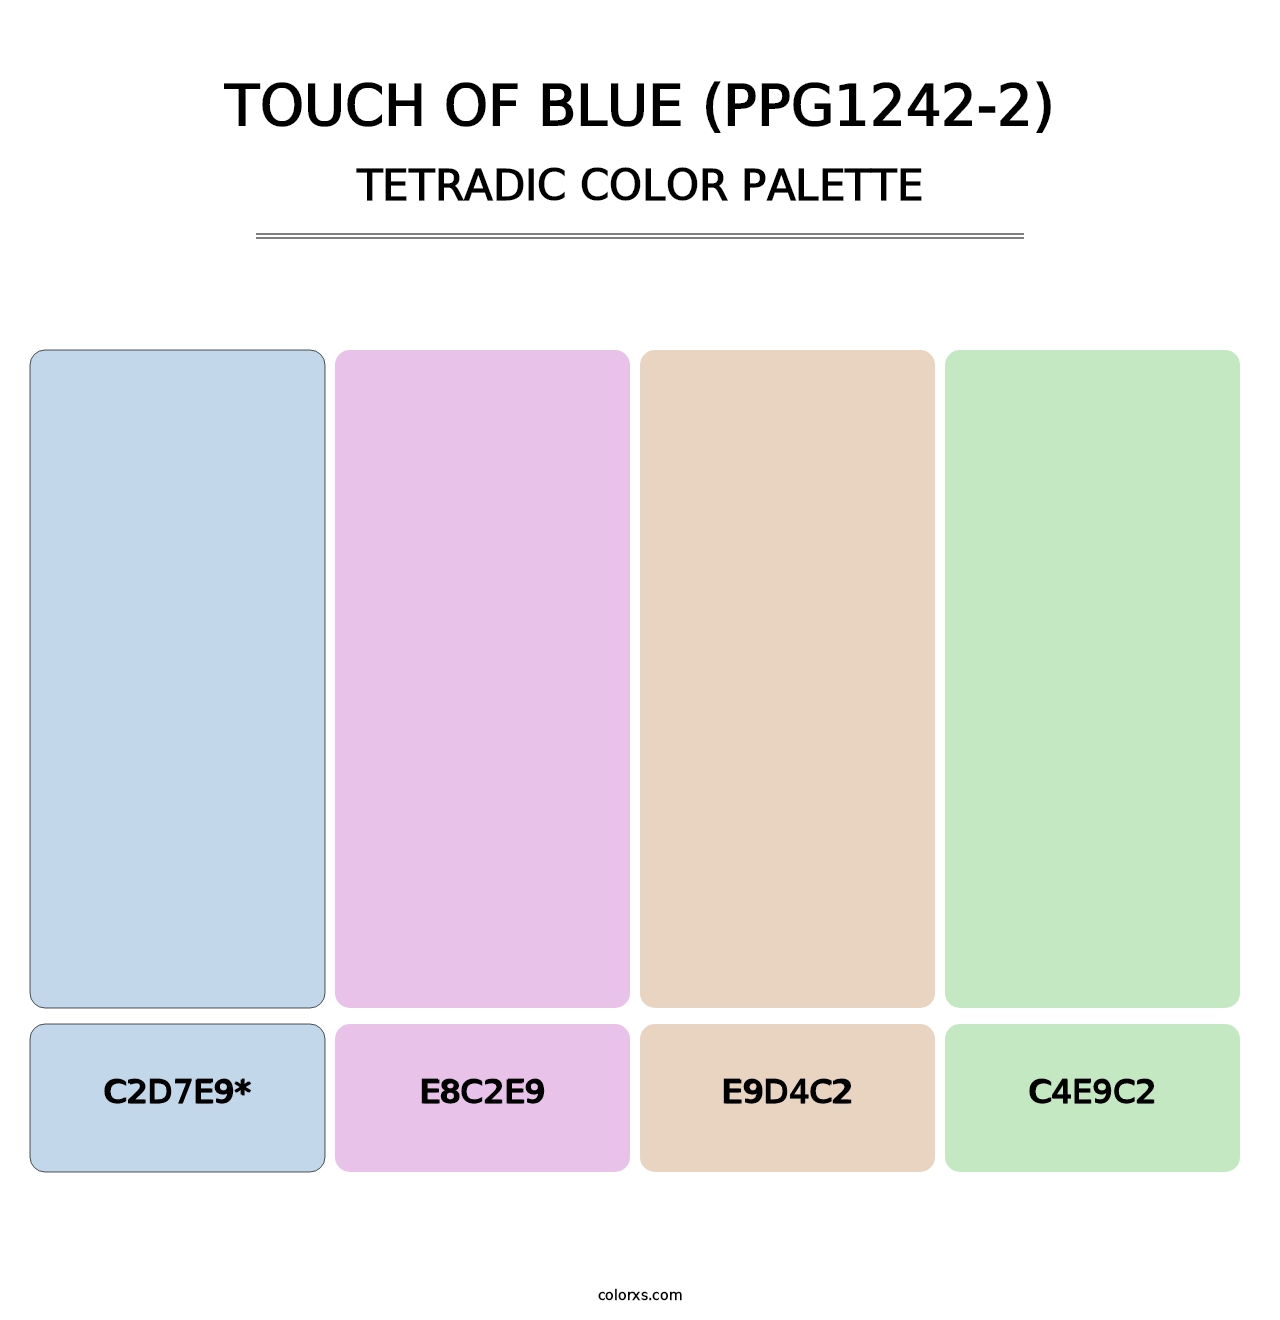 Touch Of Blue (PPG1242-2) - Tetradic Color Palette